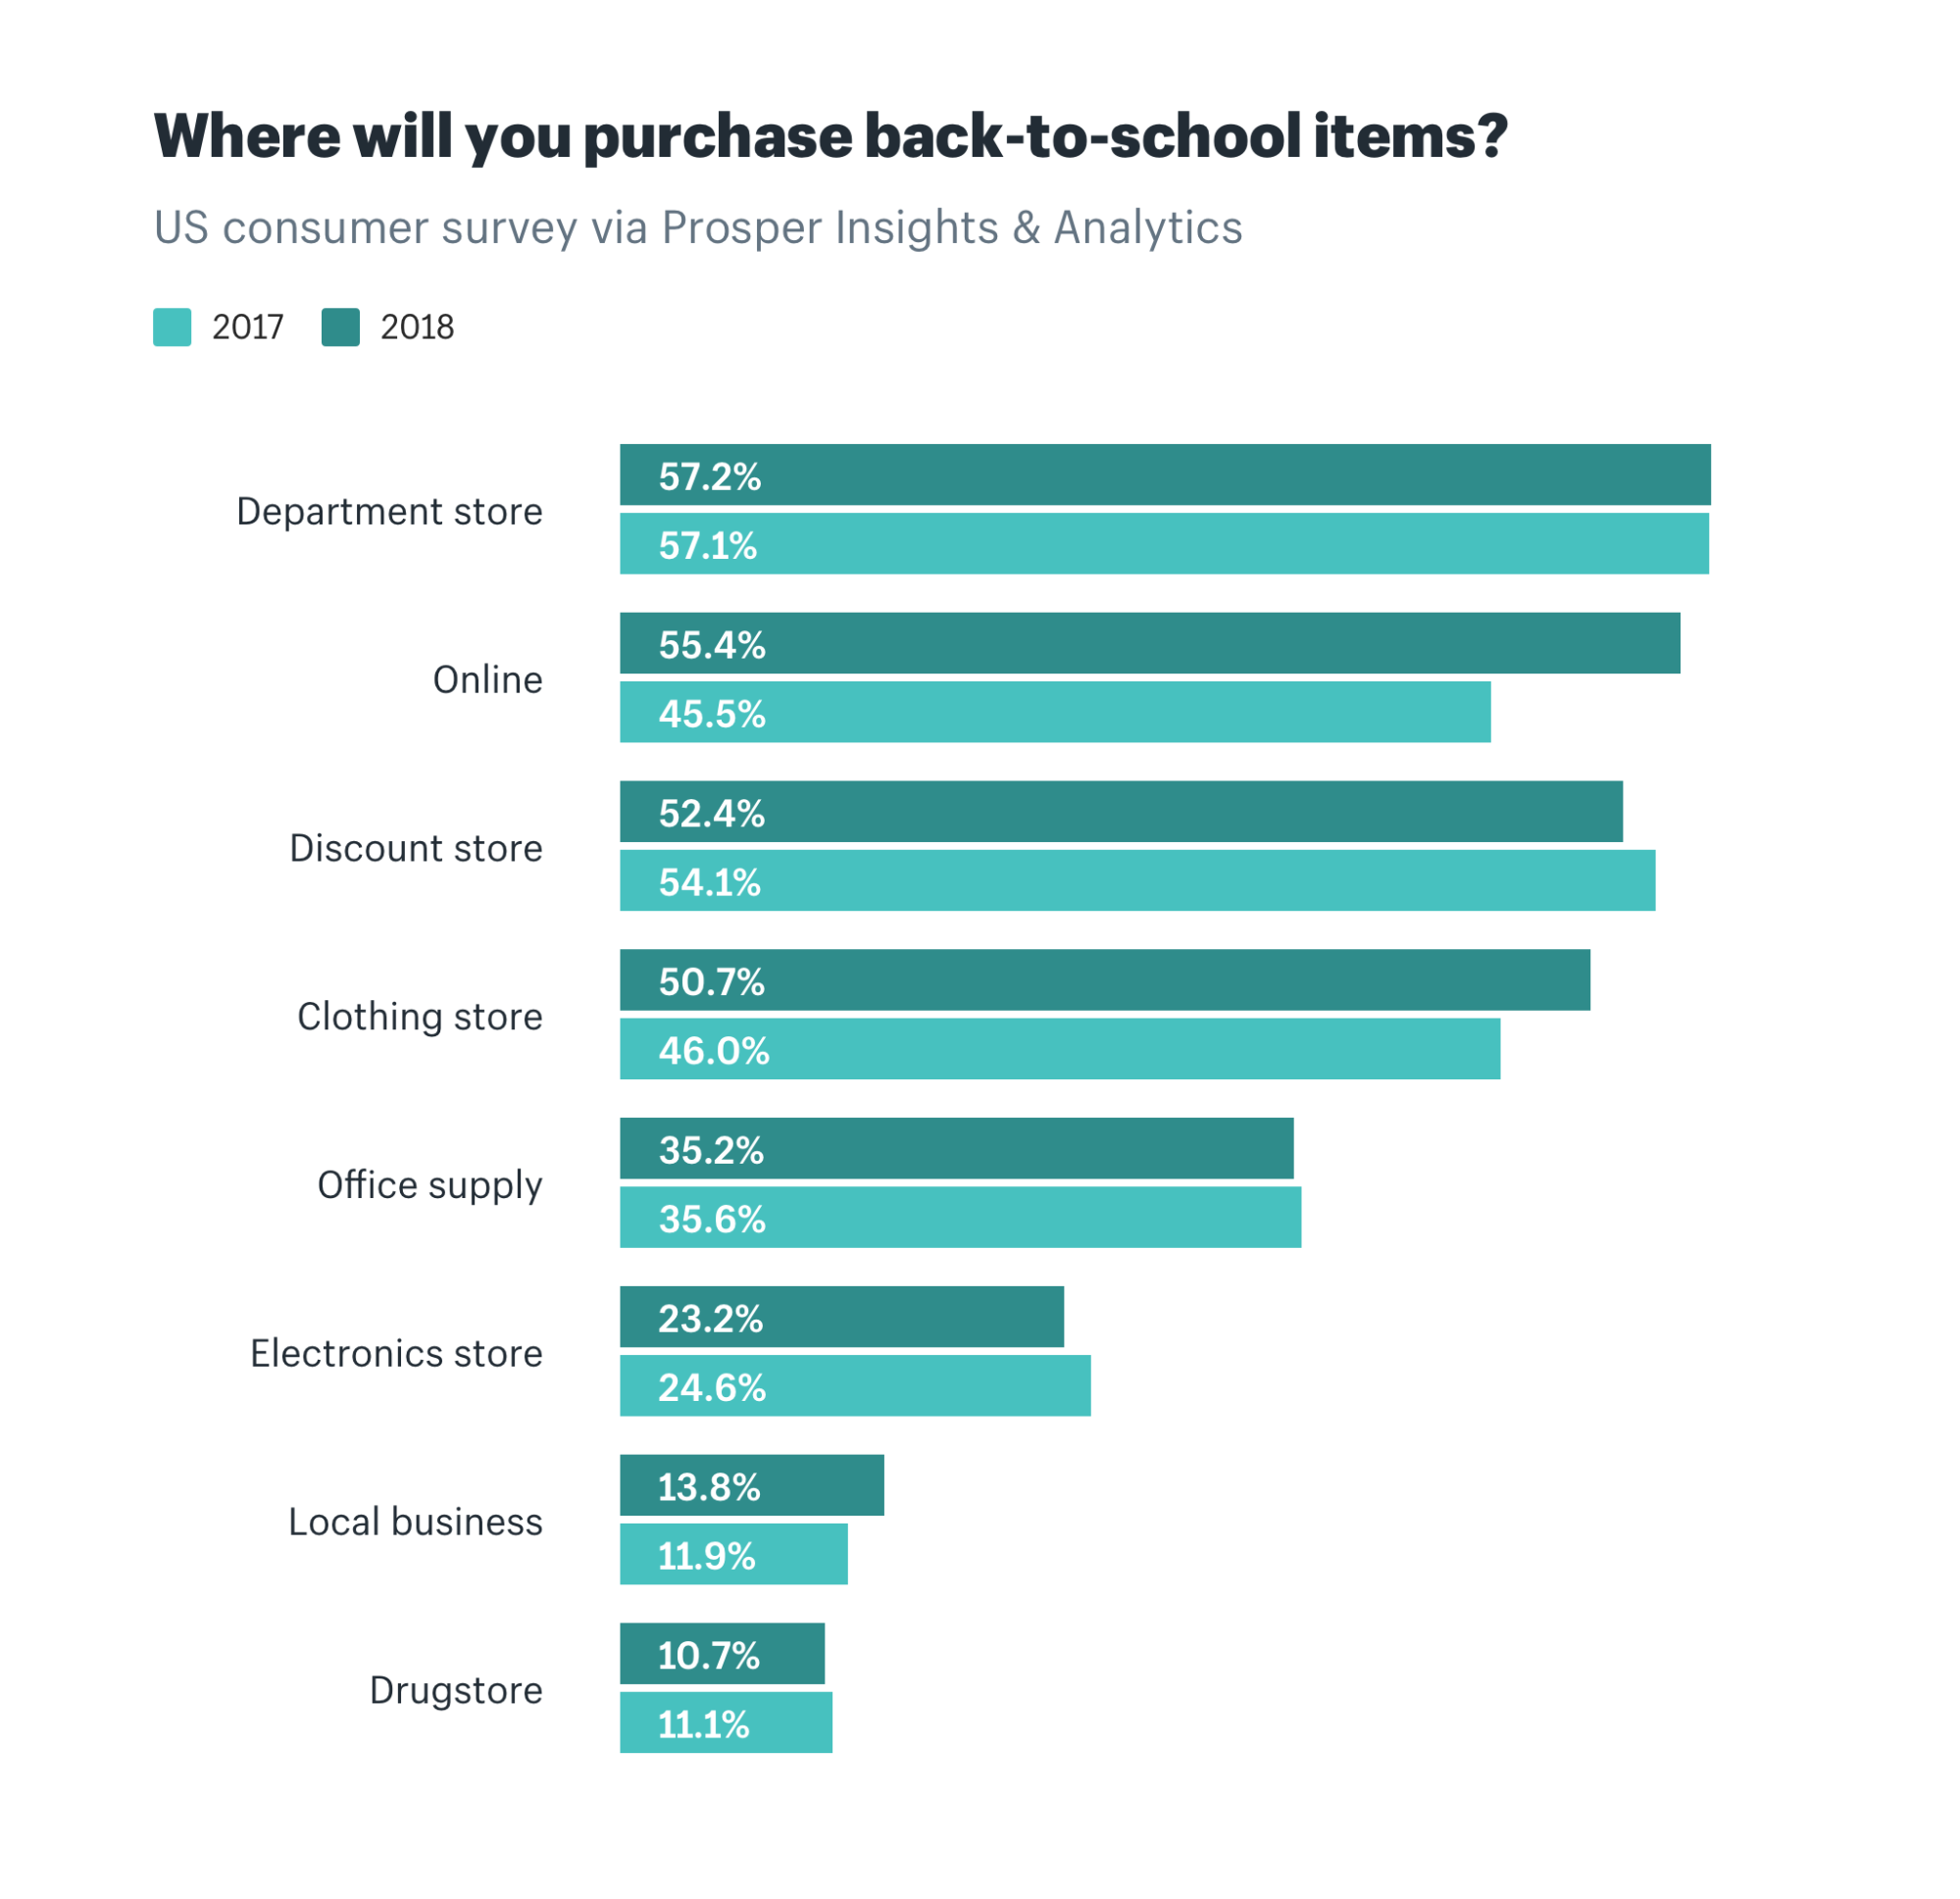 Where will you purchase back to school items